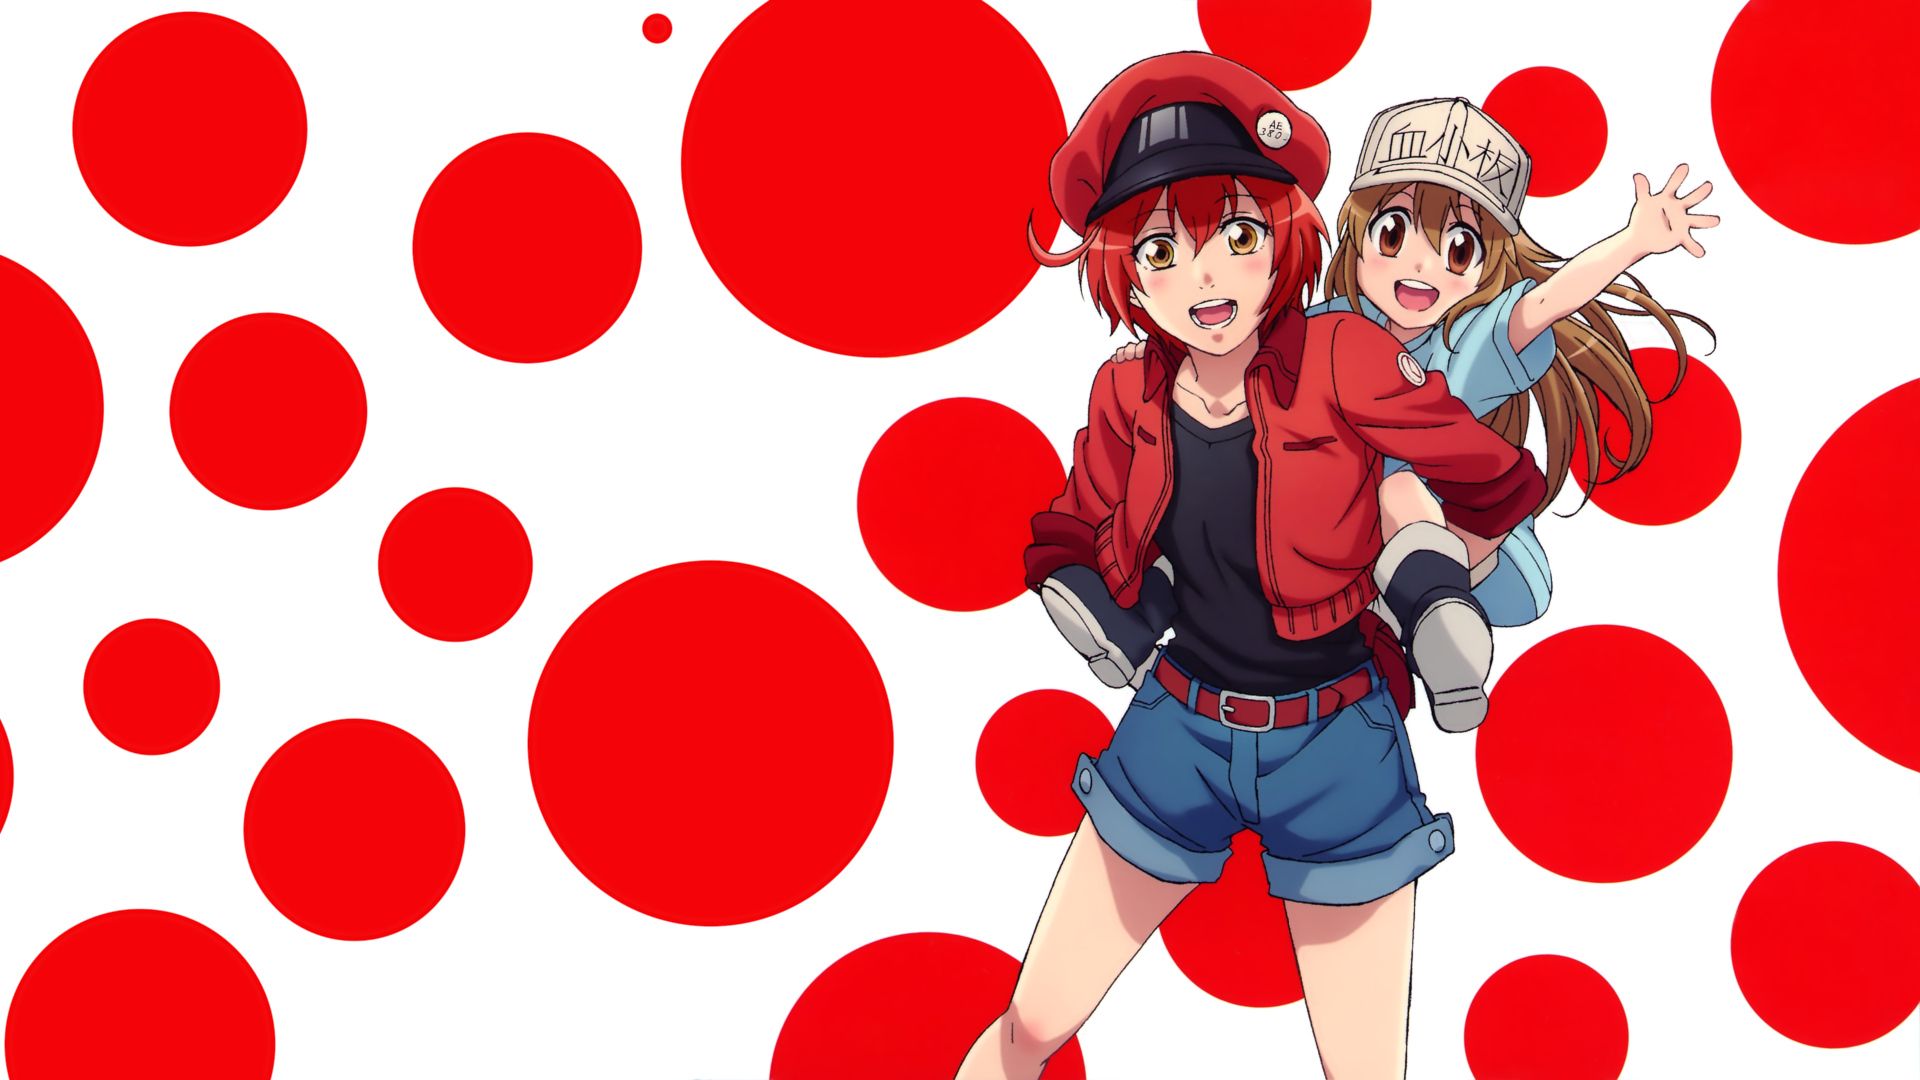 Cells at Work! background